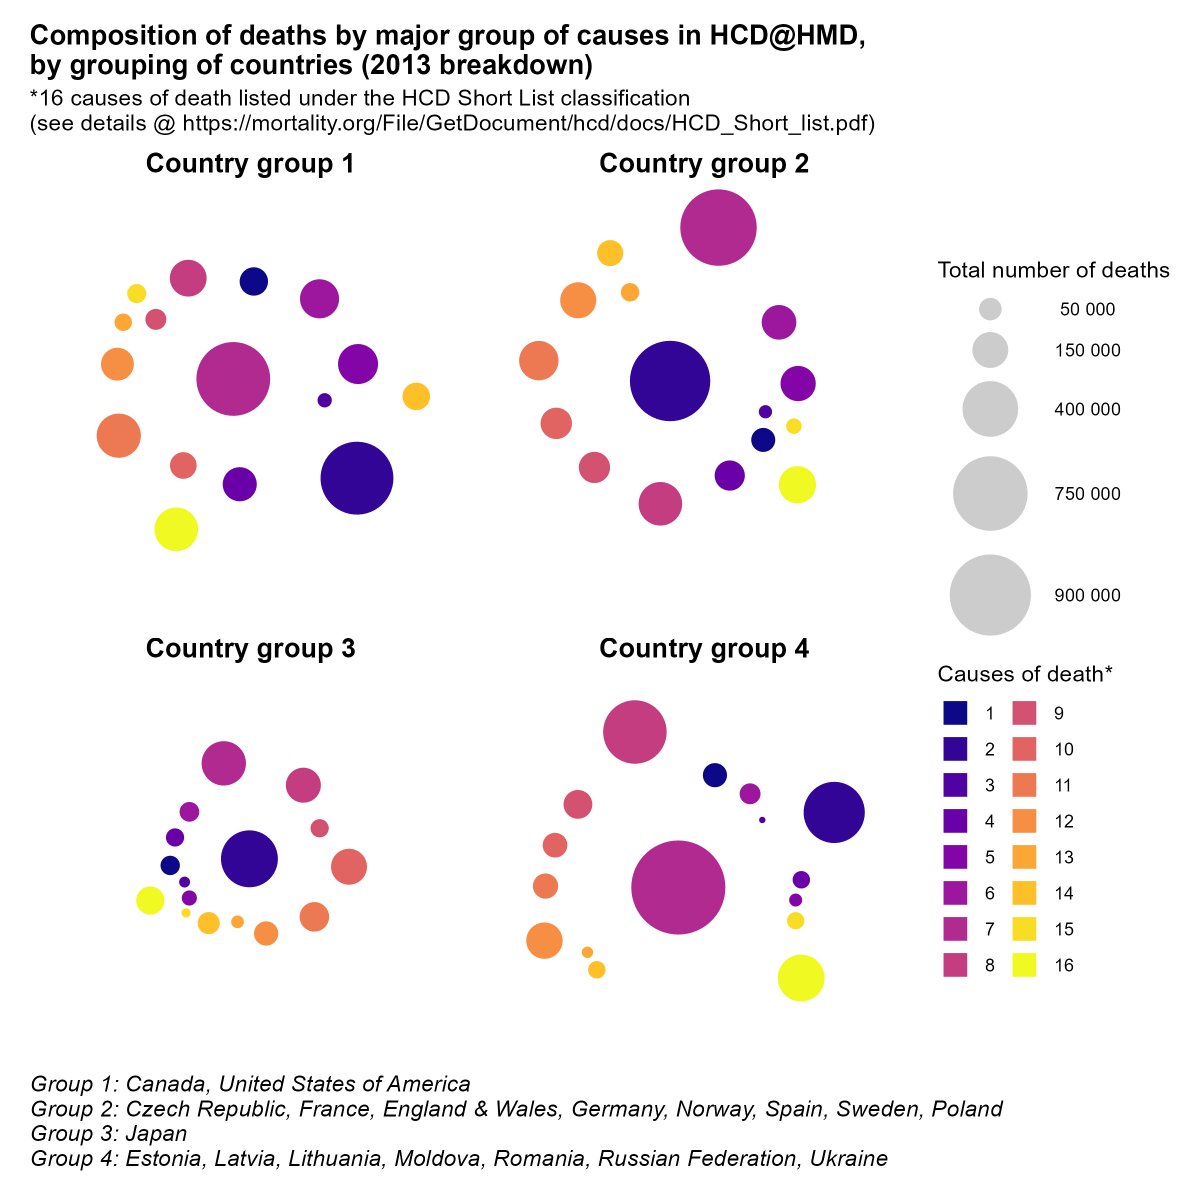 📢 #poptwitter #epitwitter ‼️ New cause-specific data series (HCD@HMD) added for 18 countries: mortality.org/Data/HCD Big thanks to László Németh, Denys Dukhovnov and Svitlana Poniakina for their work on the project under supervision of @MagaliBarbieri and @FranceMesle. (1/5)